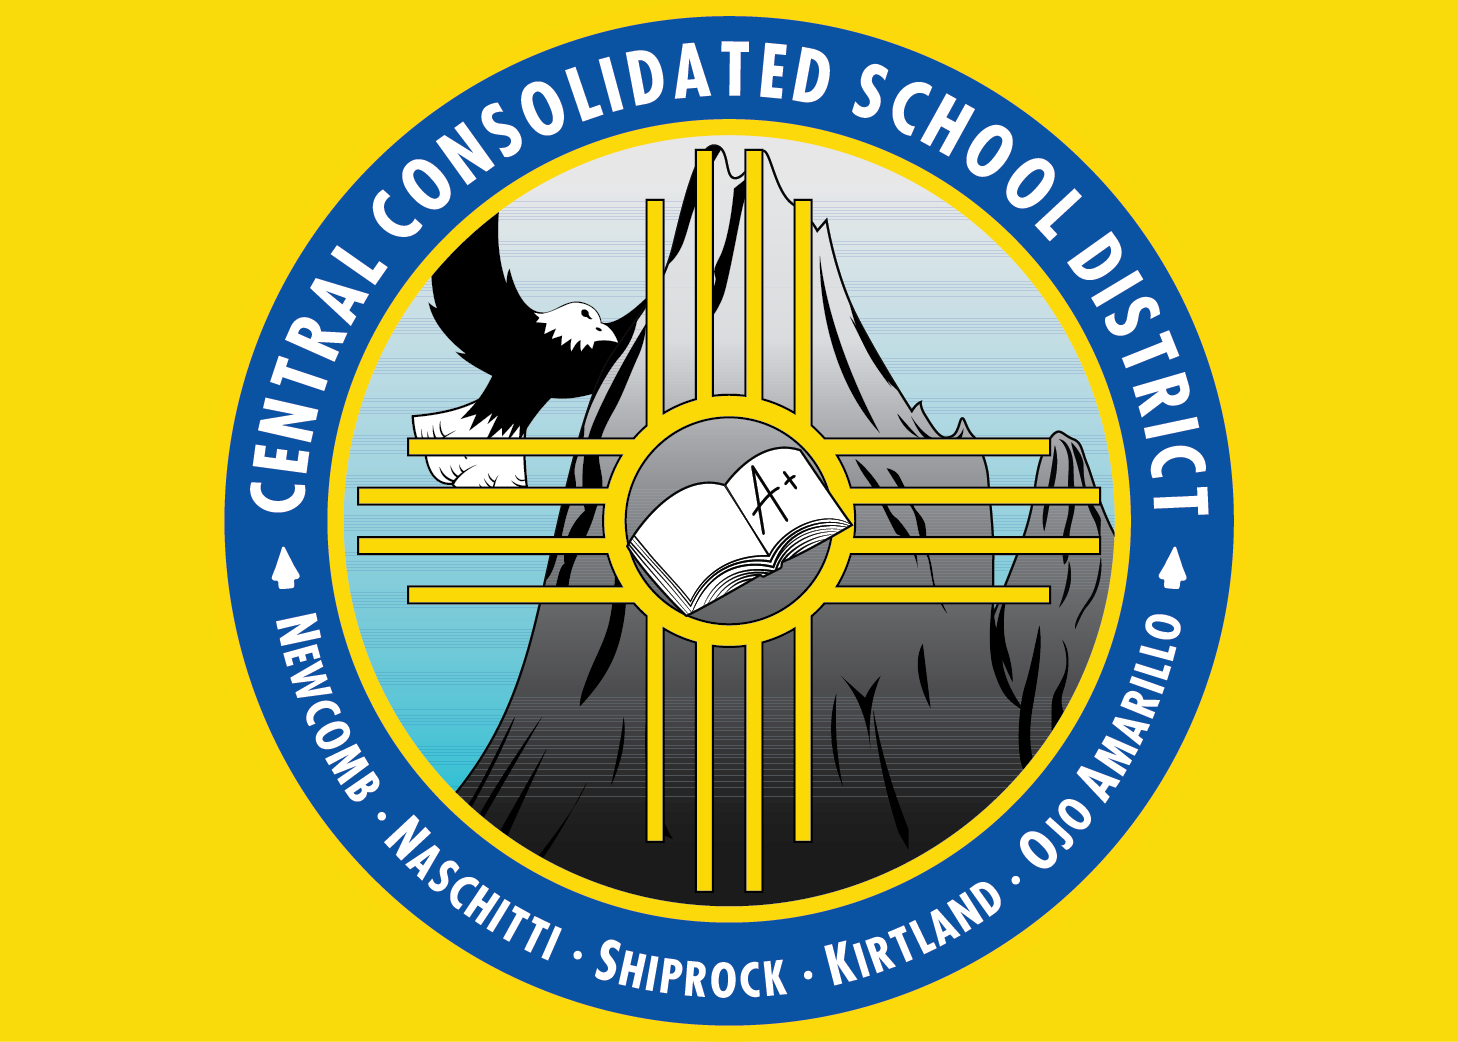 Central Consolidated School District's Image